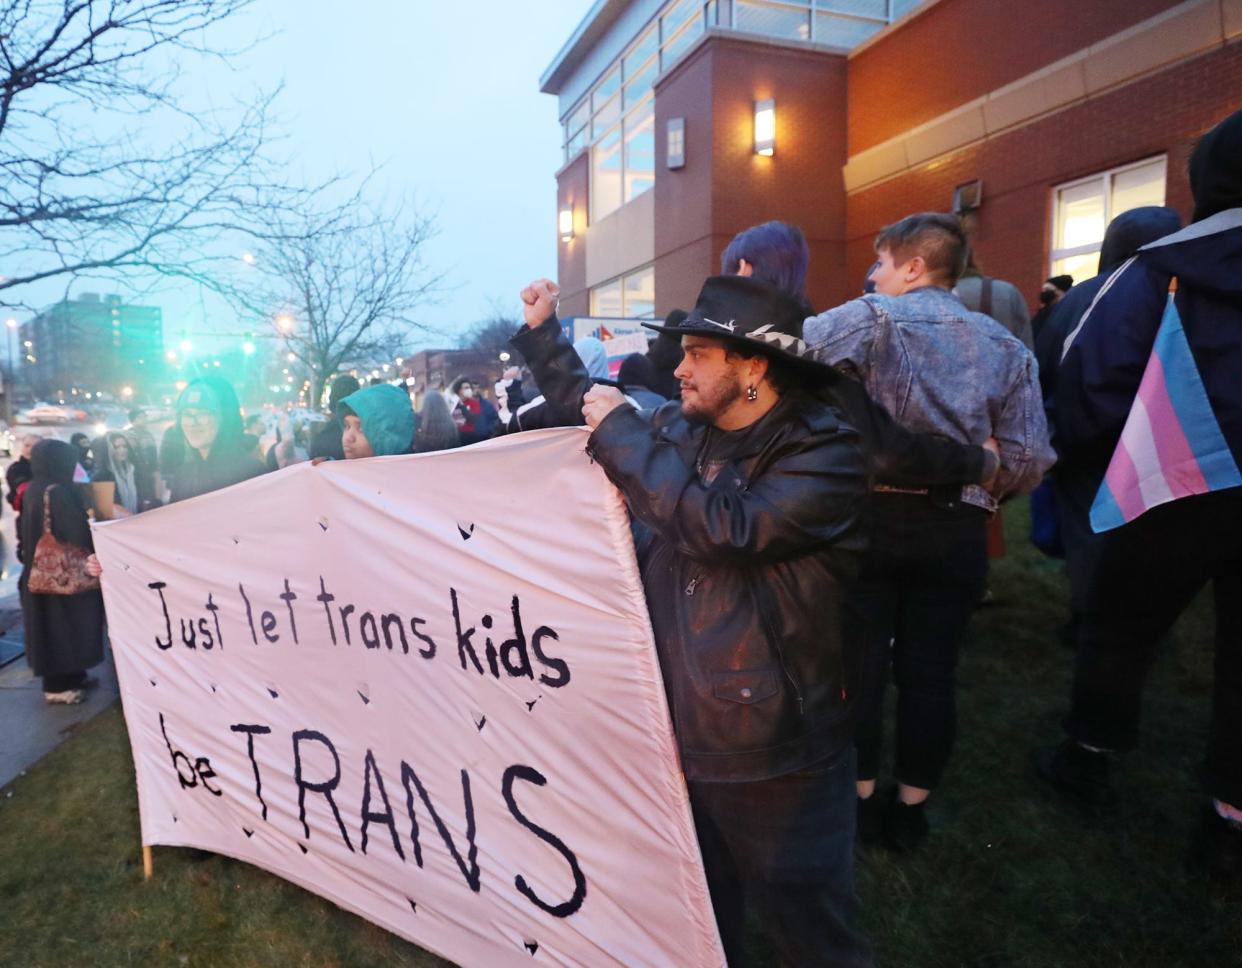 Kevyn Breedon, 32, reacts to a honk of support during a rally for trans rights at the Highland Square Branch Library on West Market Street in Akron on Wednesday. The Ohio Senate voted to override the governor's veto of House Bill 68, which will restrict gender-affirming care for minors.